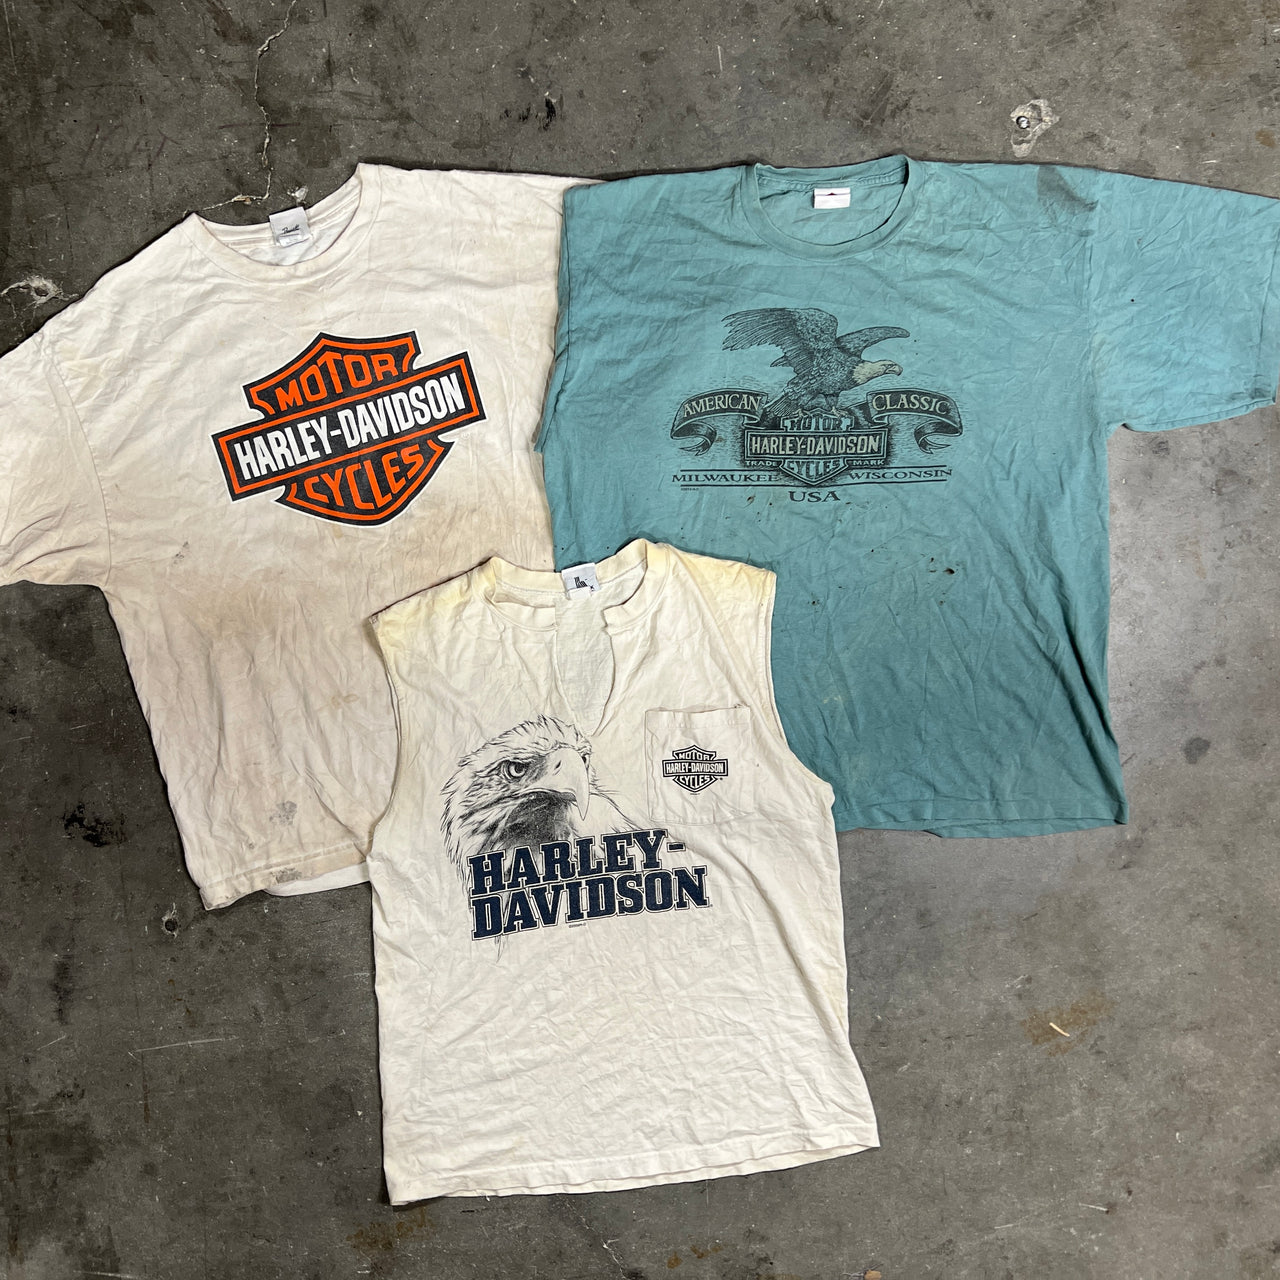 Wholesale Thrashed & Stained (C Grade) Harley Davidson T-Shirts